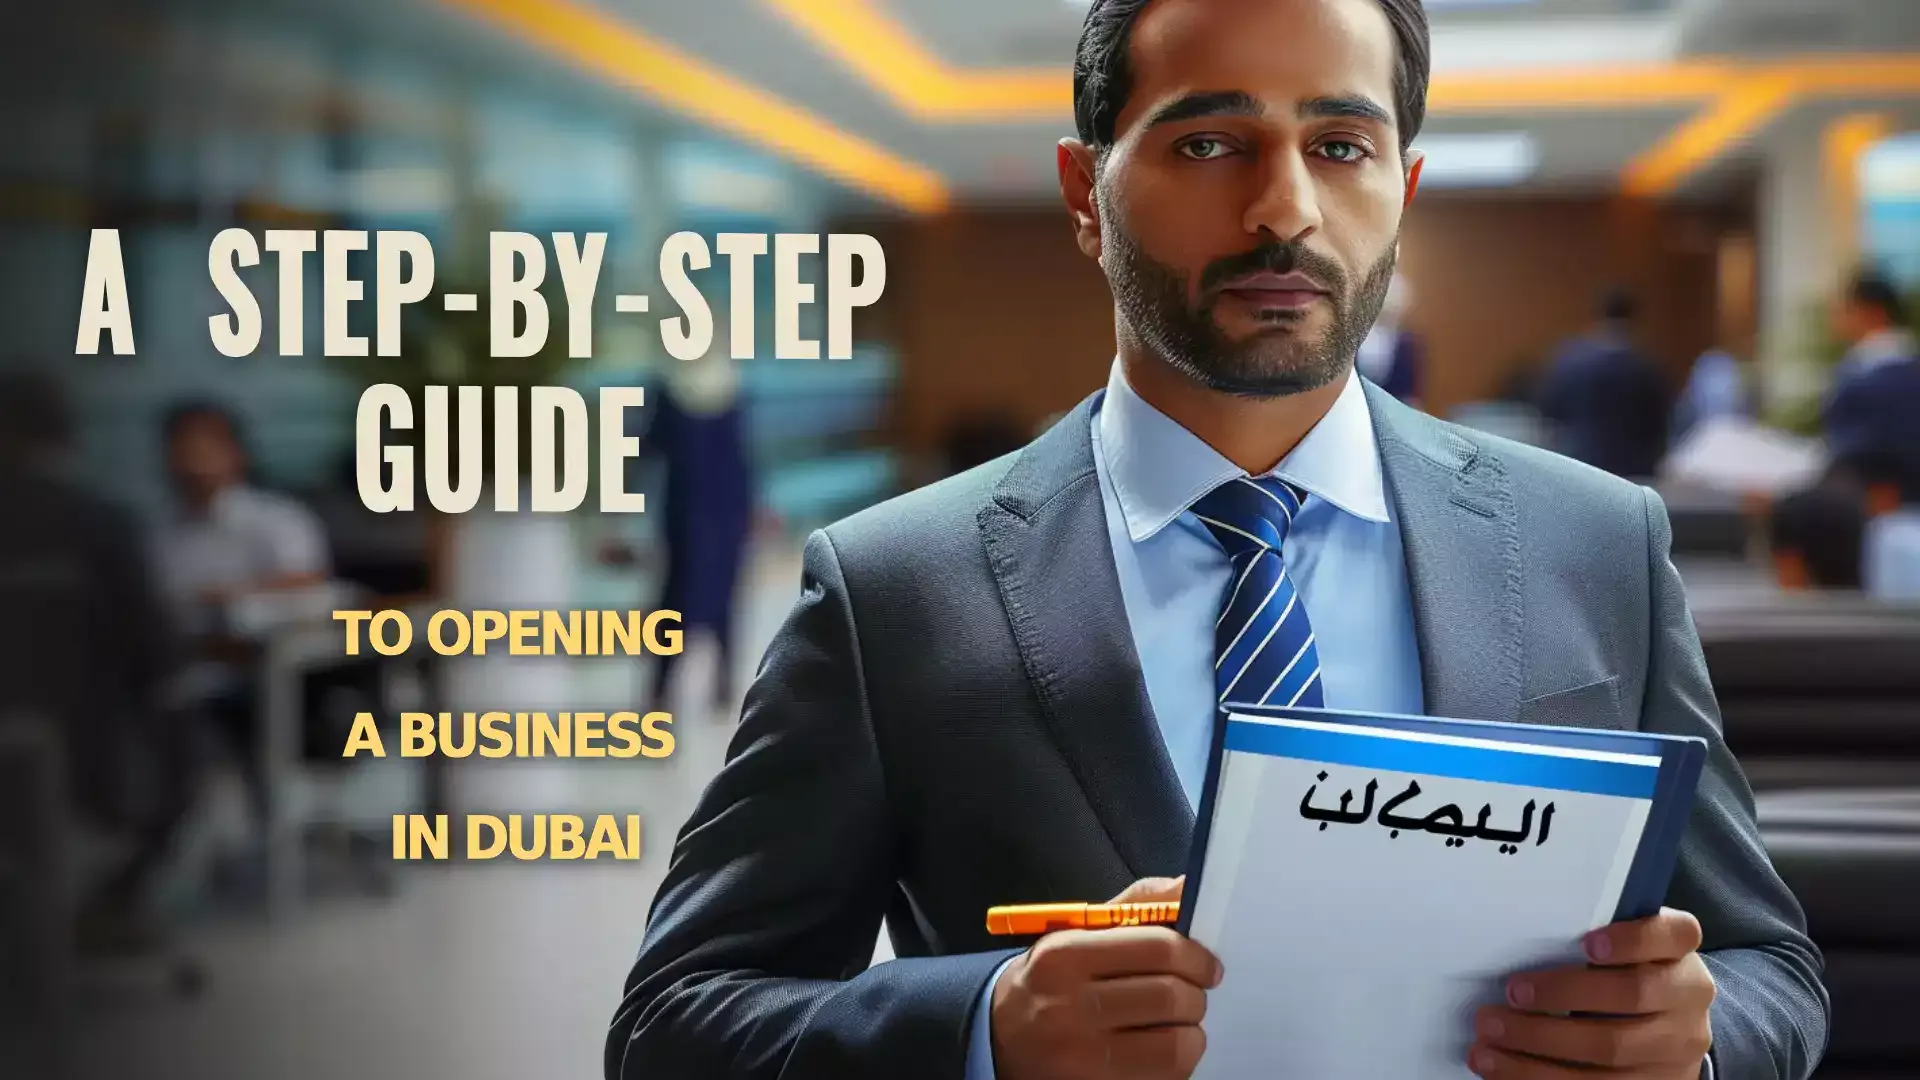 Image depicting the process of opening a business in Dubai